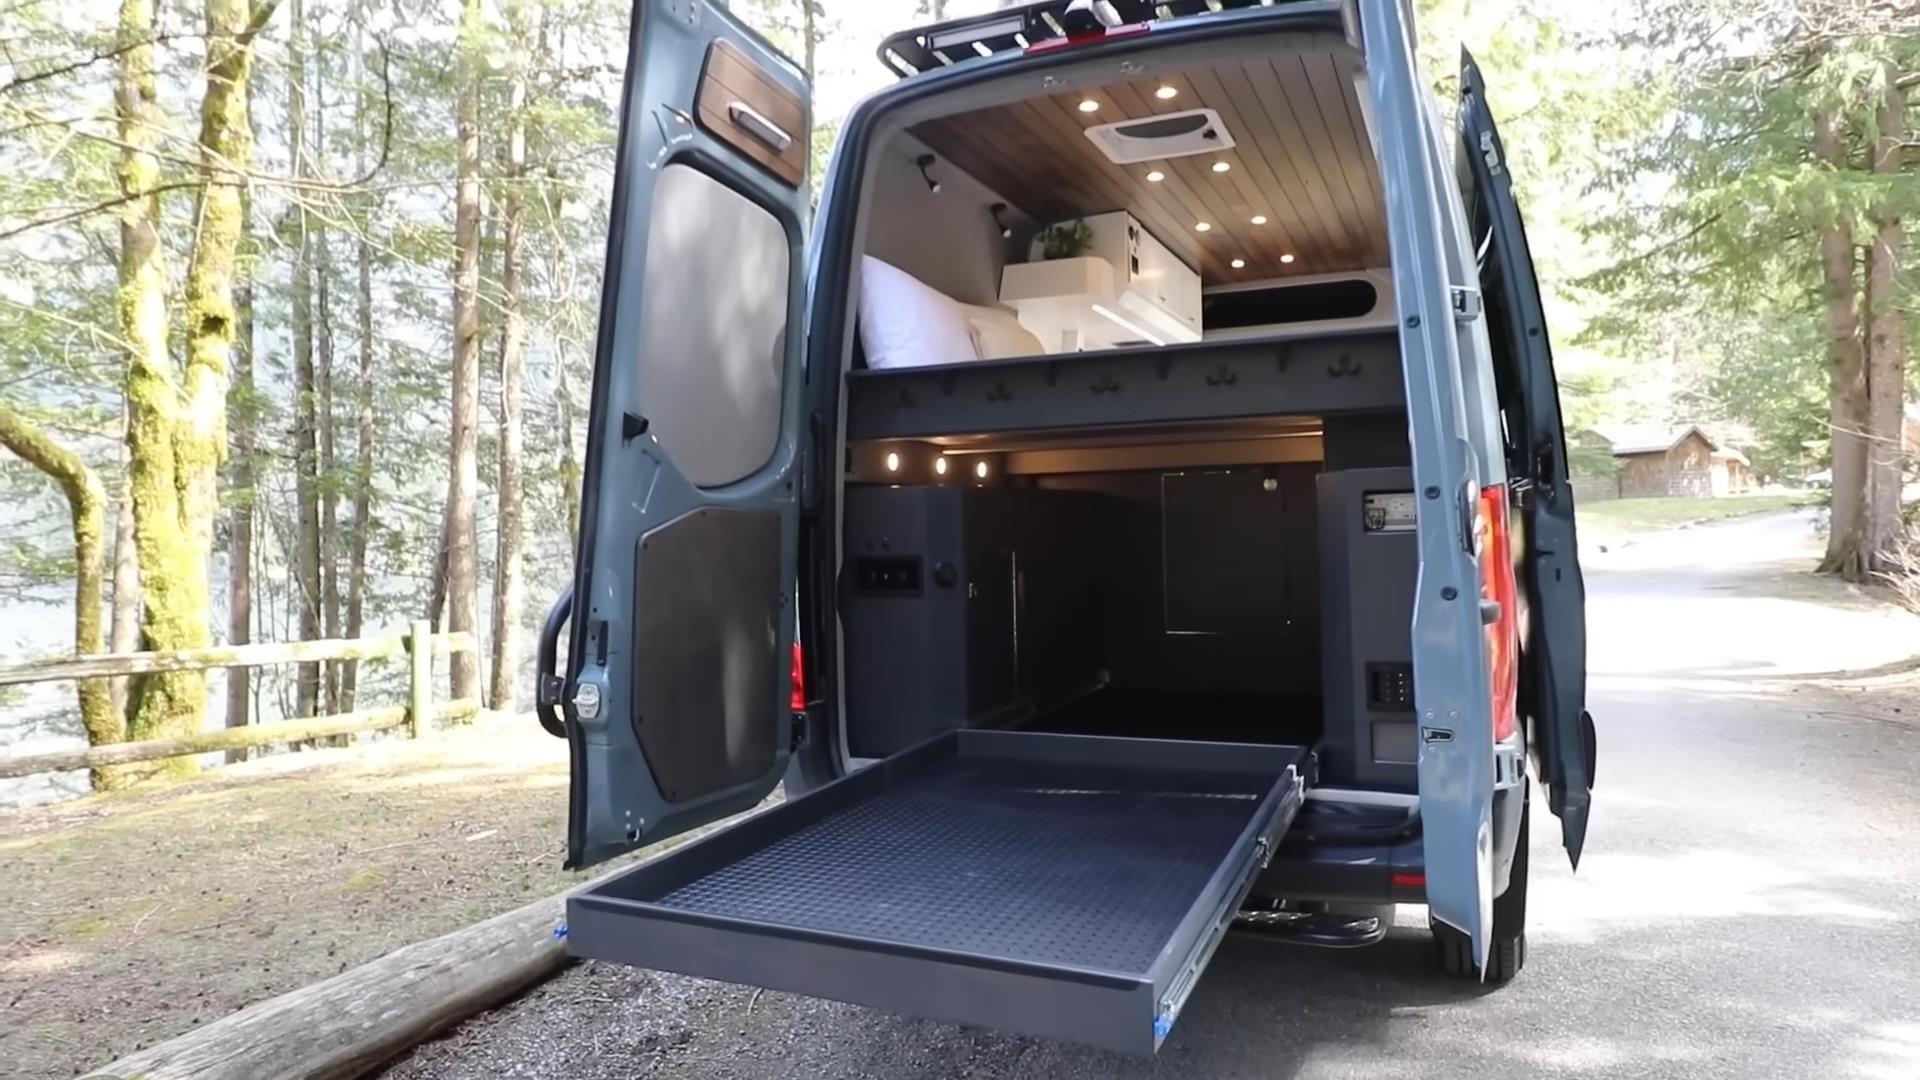 Freedom Van Sprinter Conversion Boasts an Invisible Stovetop and a King - Size Bed